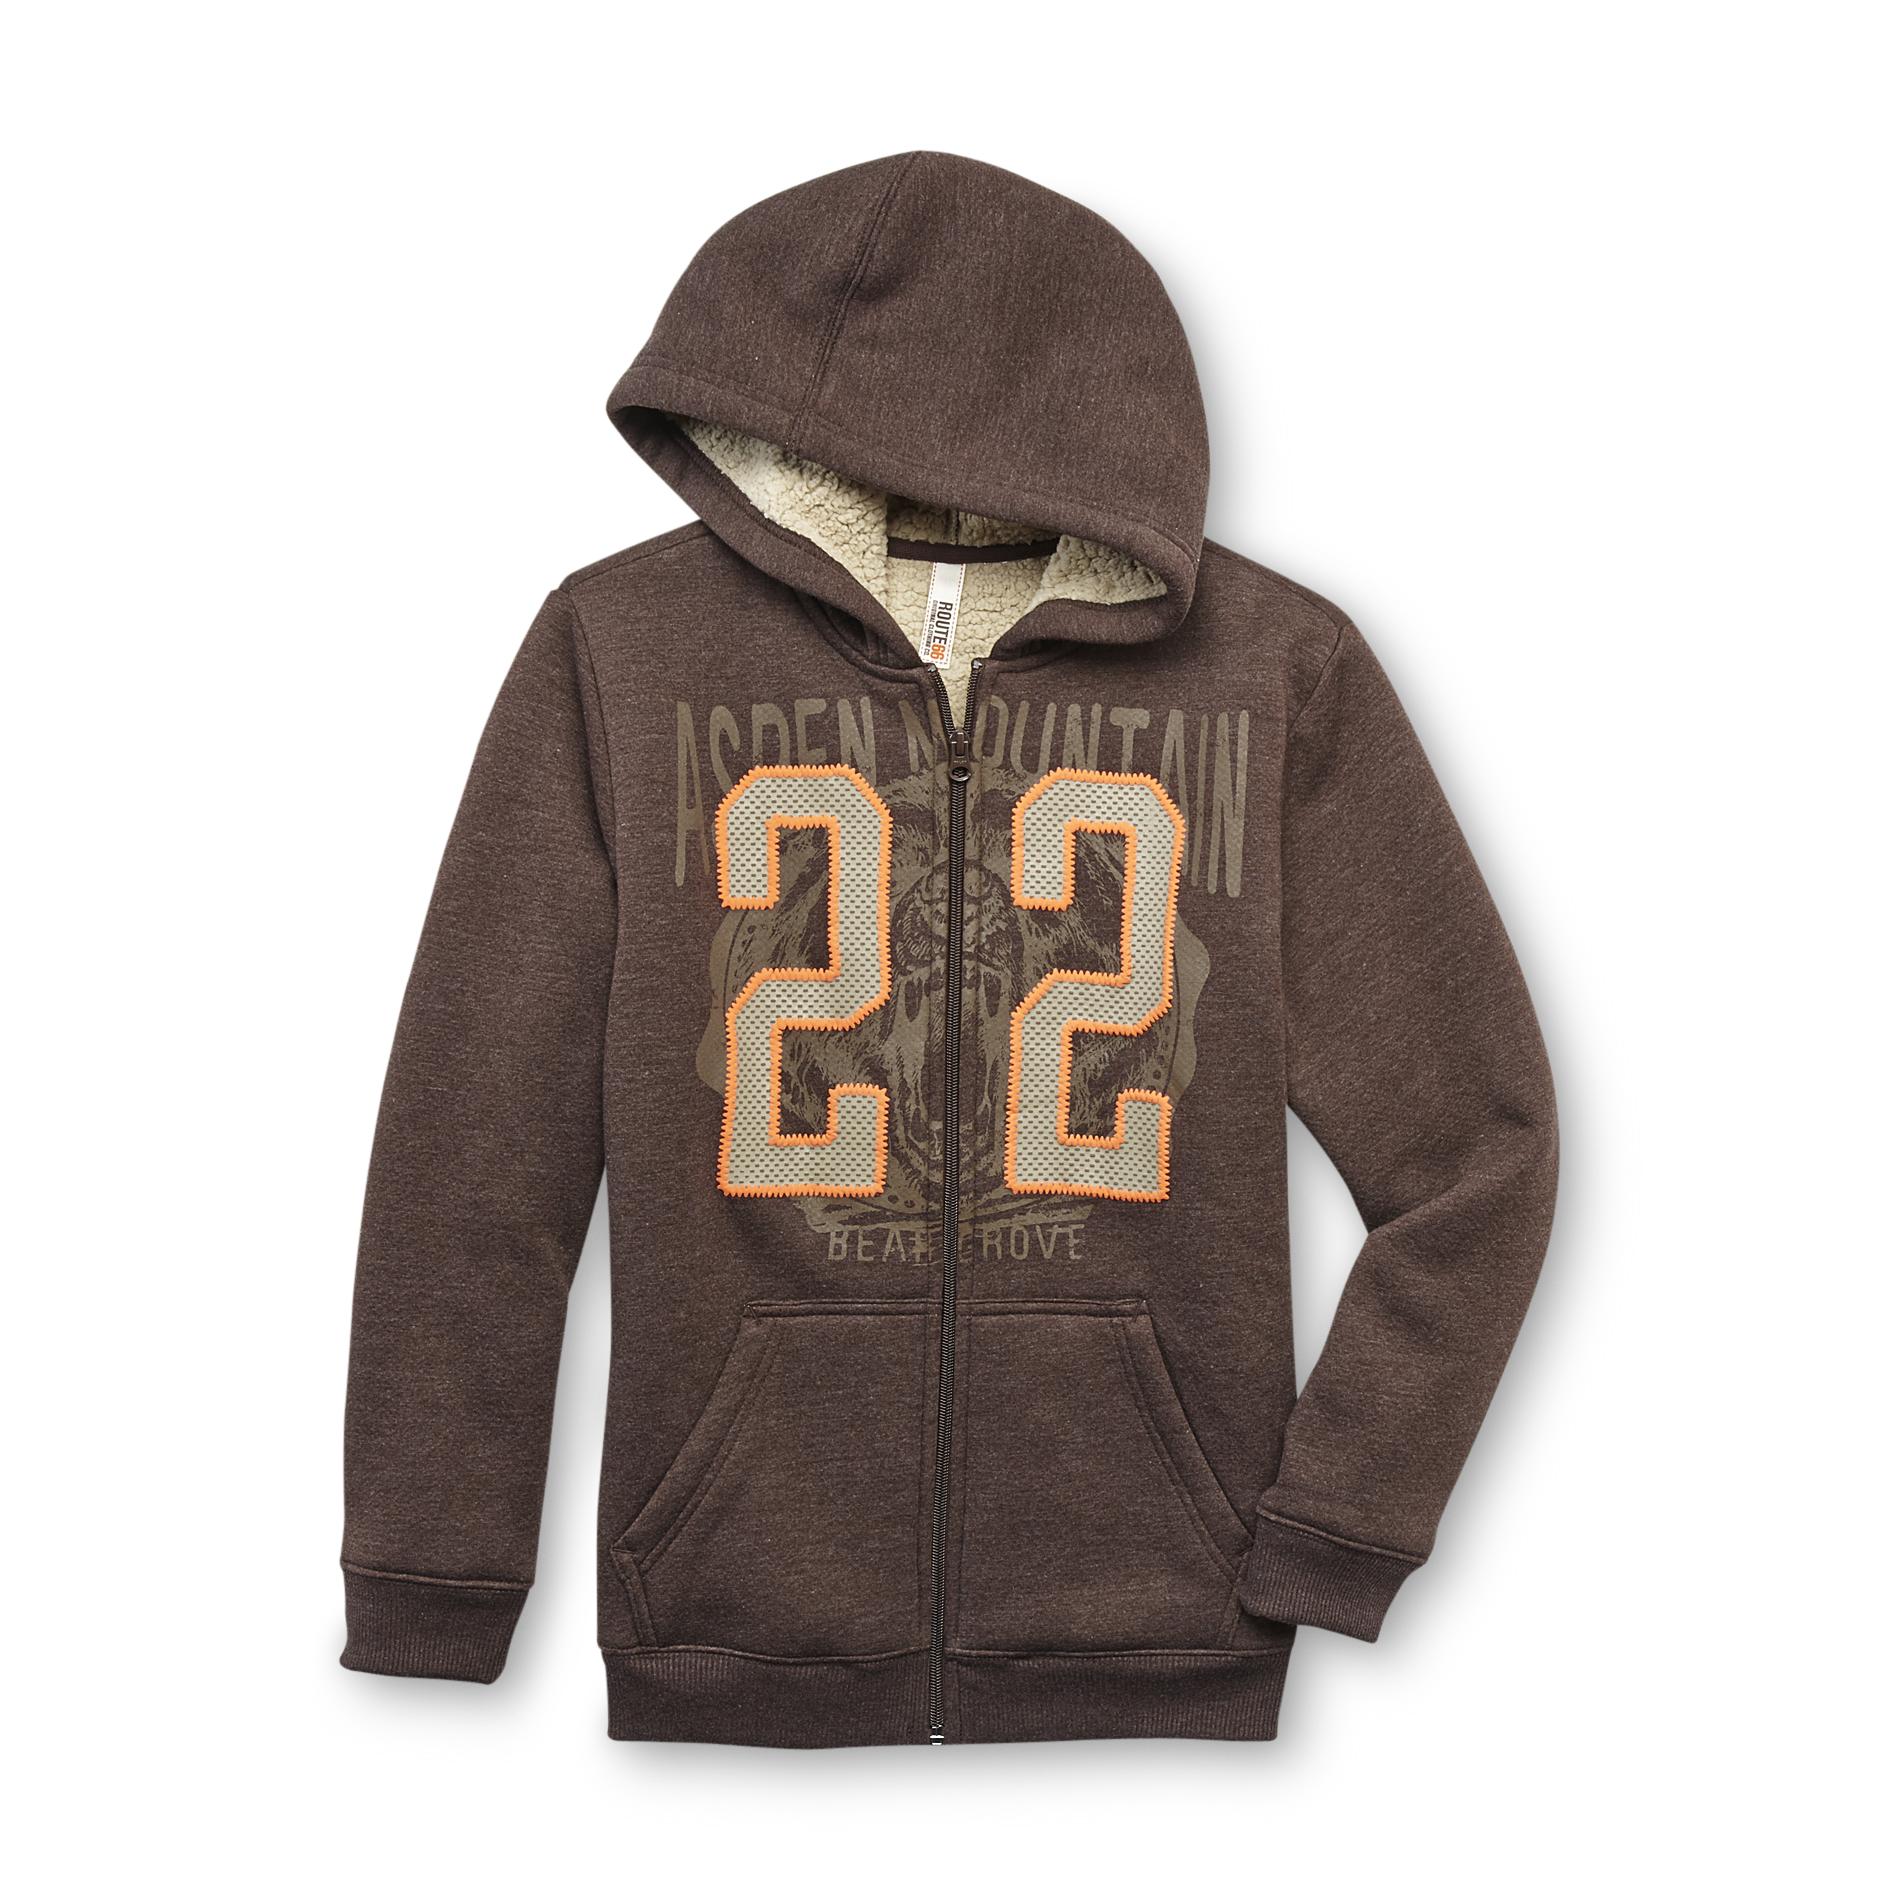 Route 66 Boy's Graphic Hoodie Jacket - Bear Grove